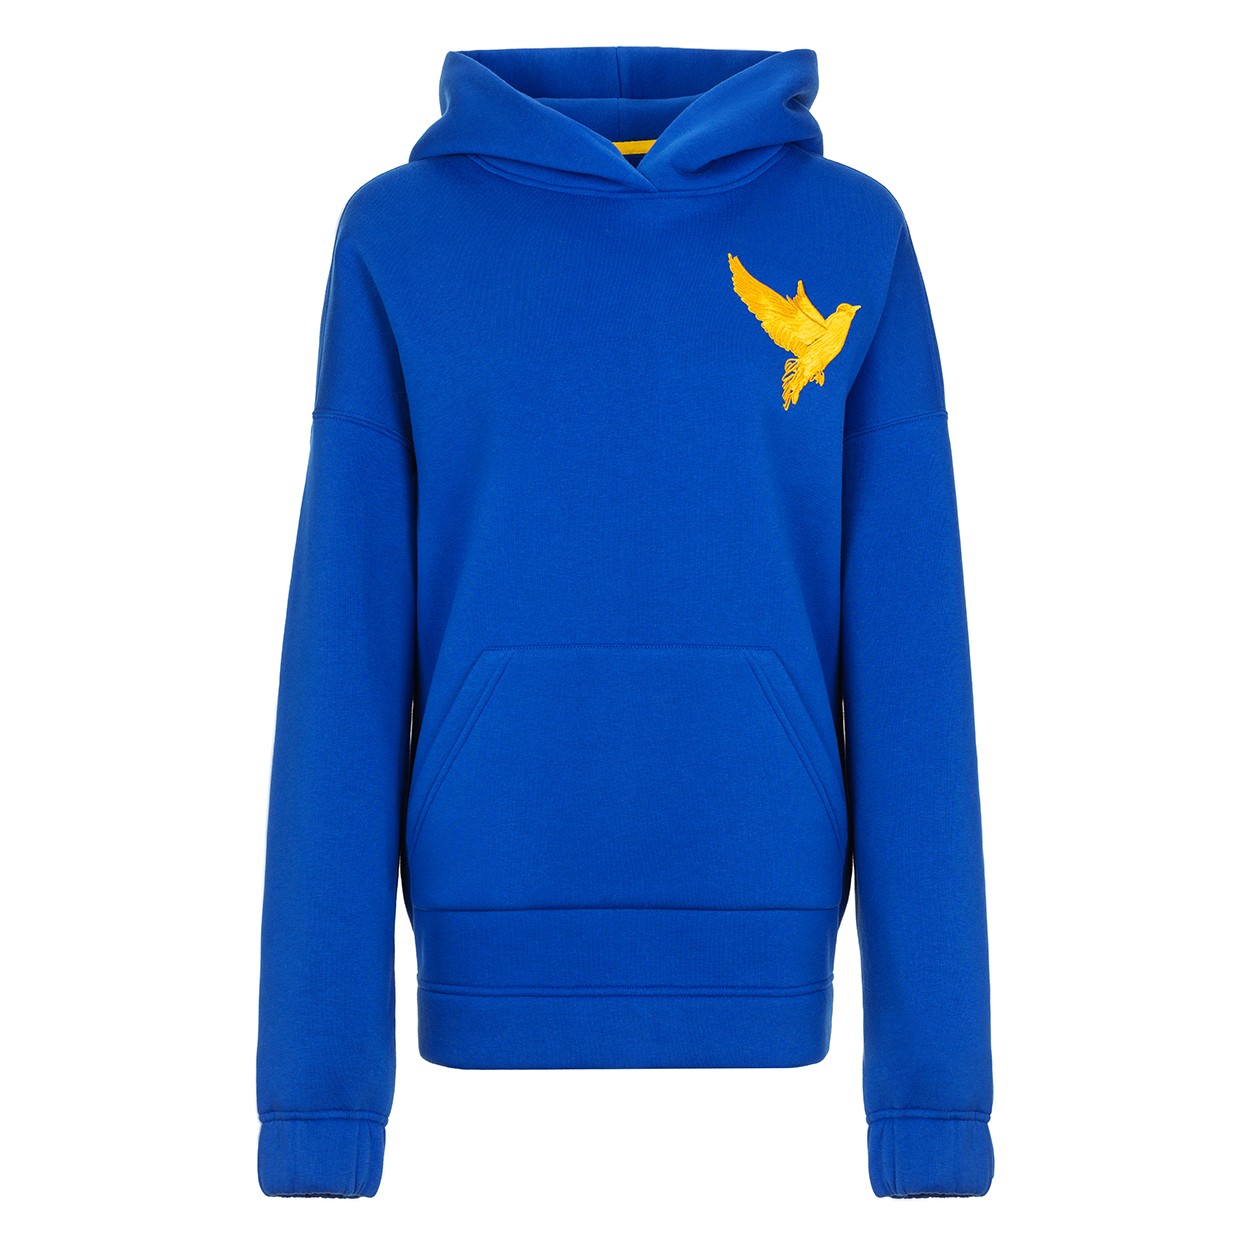 Blue  hoodie with embroidered